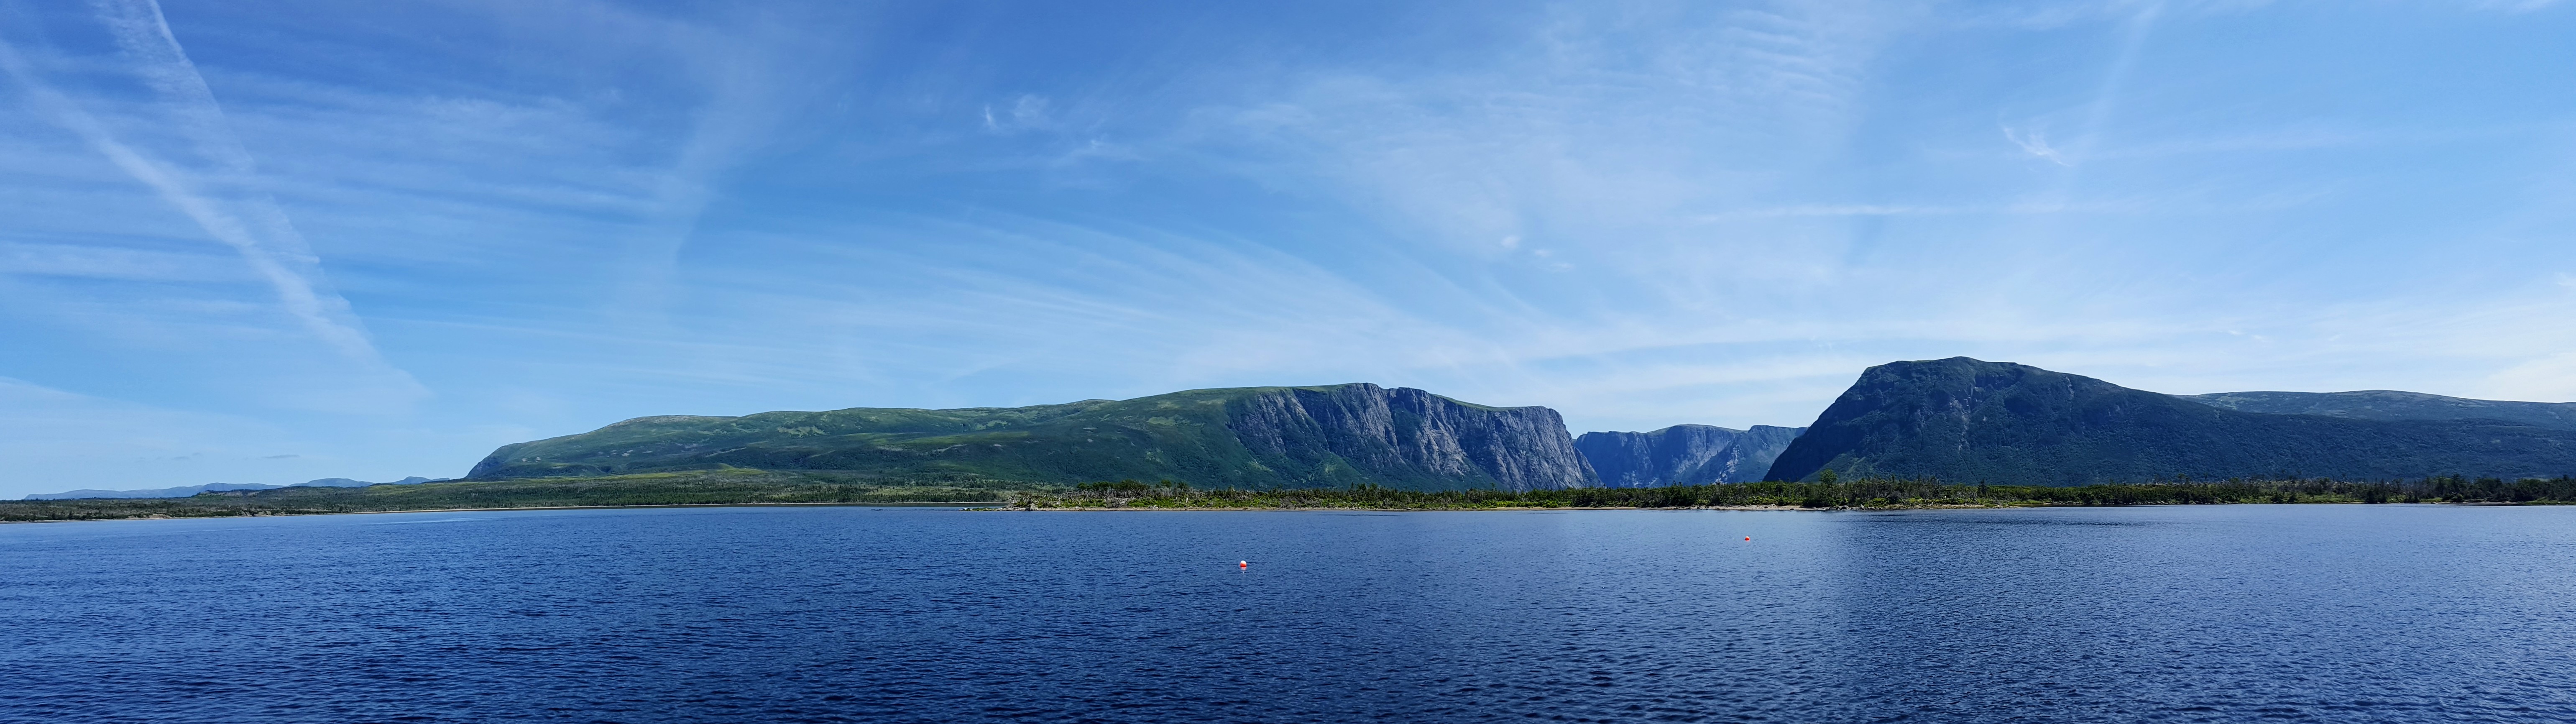 Western Brook Boat Tour.